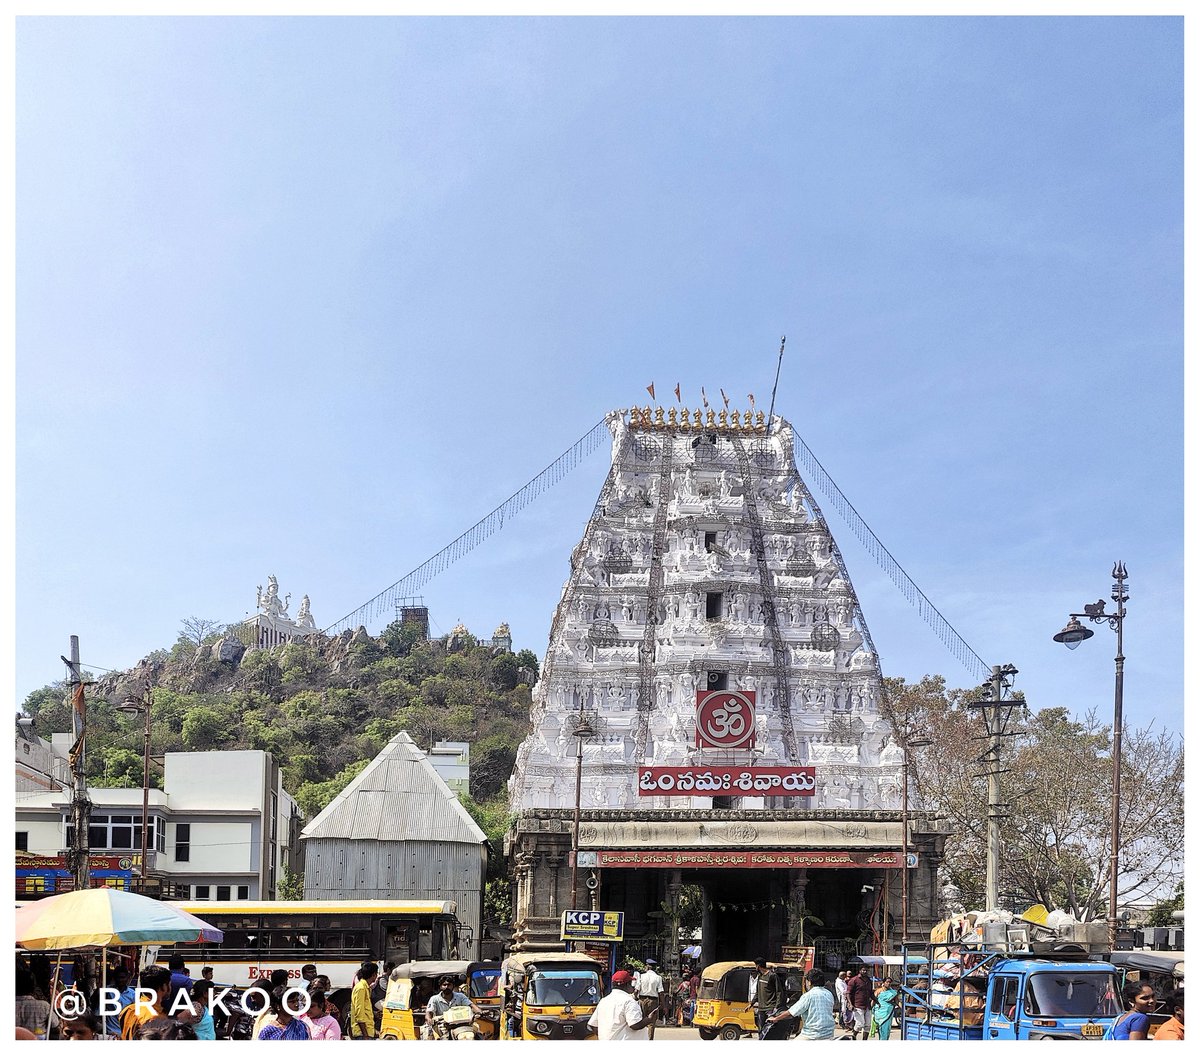 Finally this morning went to Srikalahasteeshwarar temple (Vayu). The lord is here with Gnana Prasunambika. Kannappa offered his eyes to the lord atop the hill behind the temple. The hill itself is considered as Kailasha. Krishnadevaraya built a 120 ft high gopuram here.